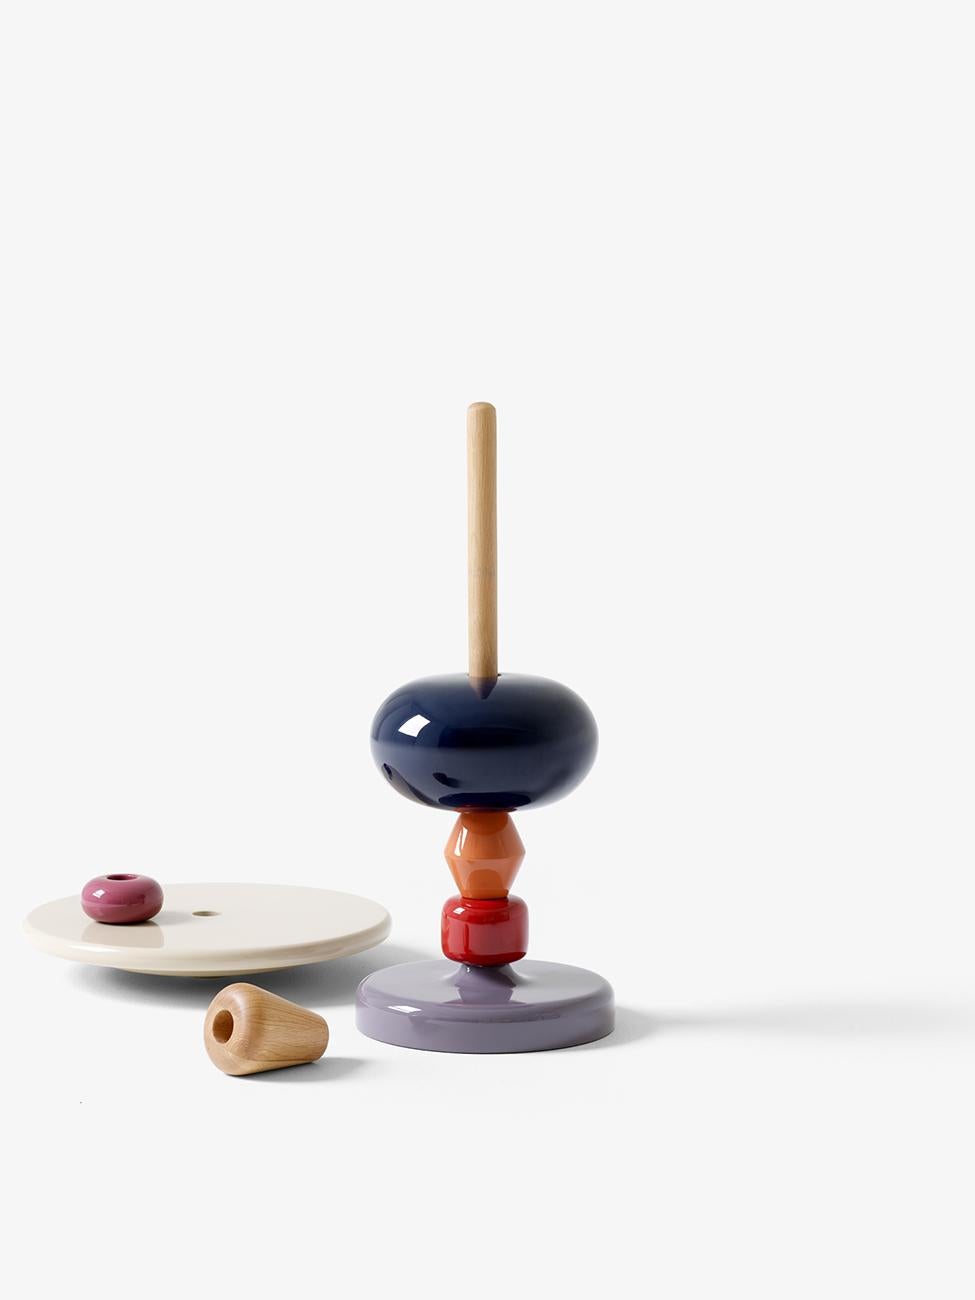 The Shuffle table seems to conjure images of classic wooden toys and with good reason. The choice of colours and the fact that you can unify and construct the table as you like are all ideas Mia Hamborg got from the Brio Stacking Clown she had as a